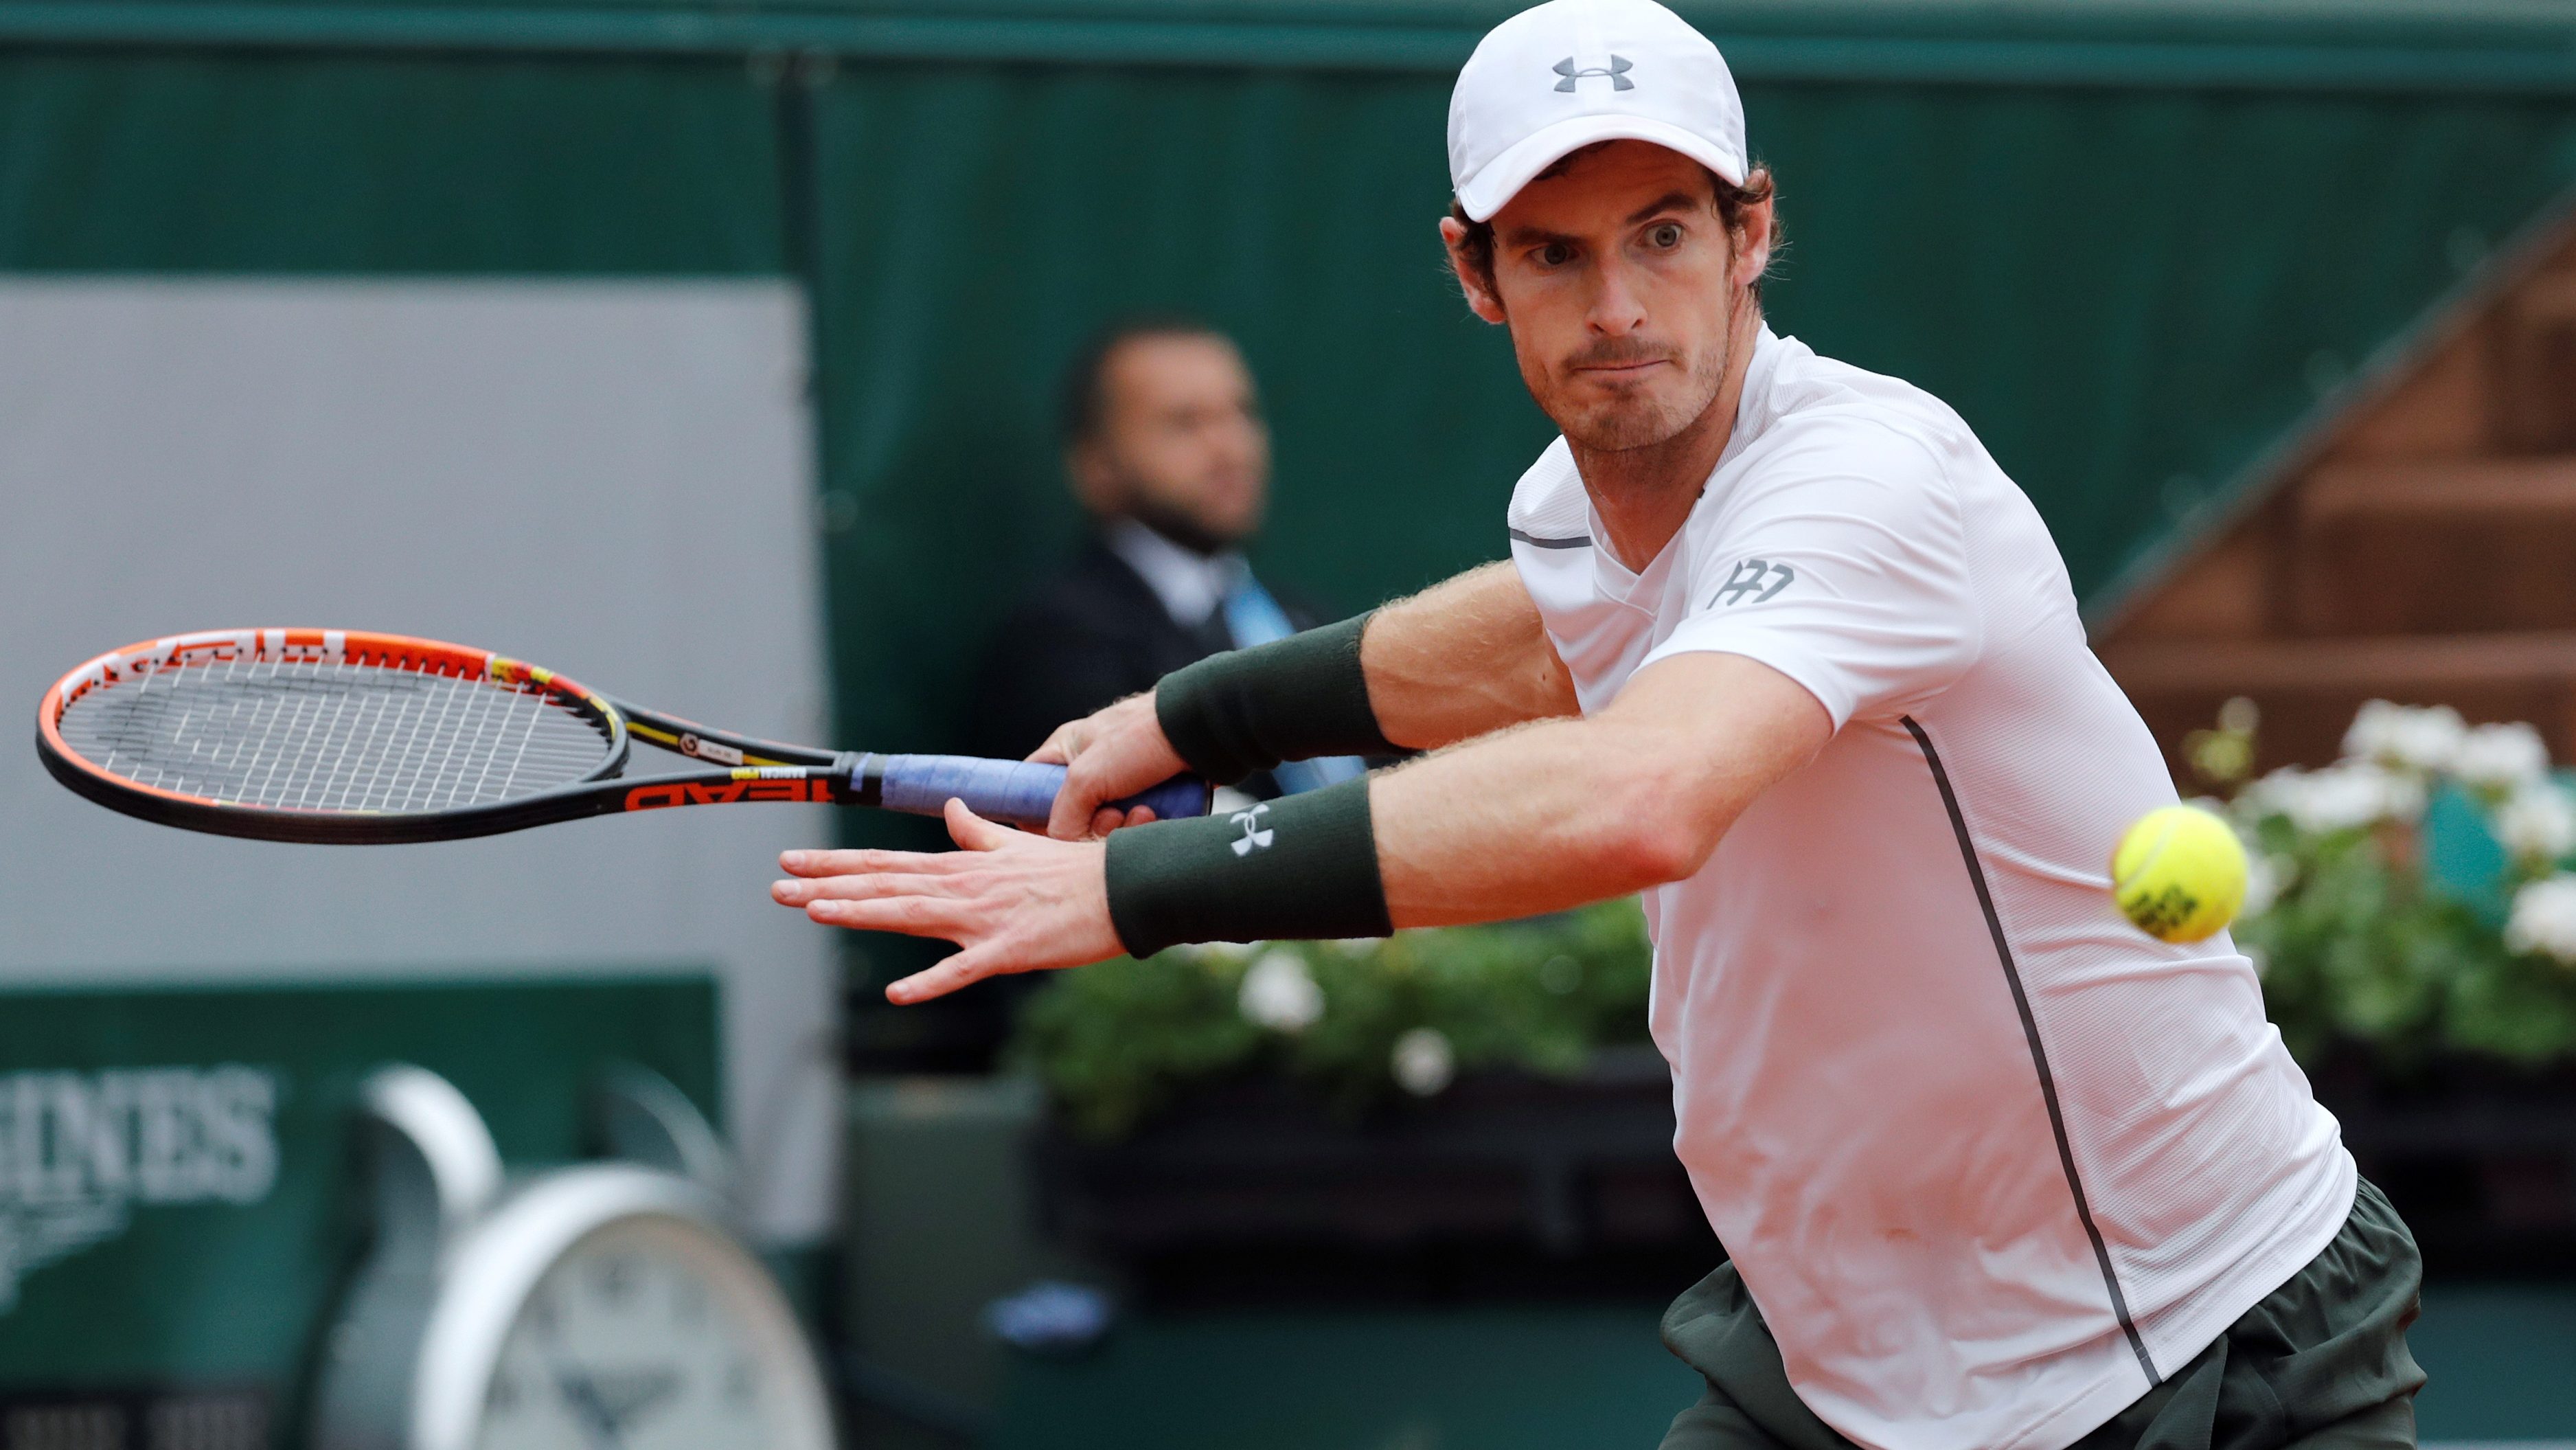 French Open 2016 Schedule: Tuesday Order of Play, TV Info